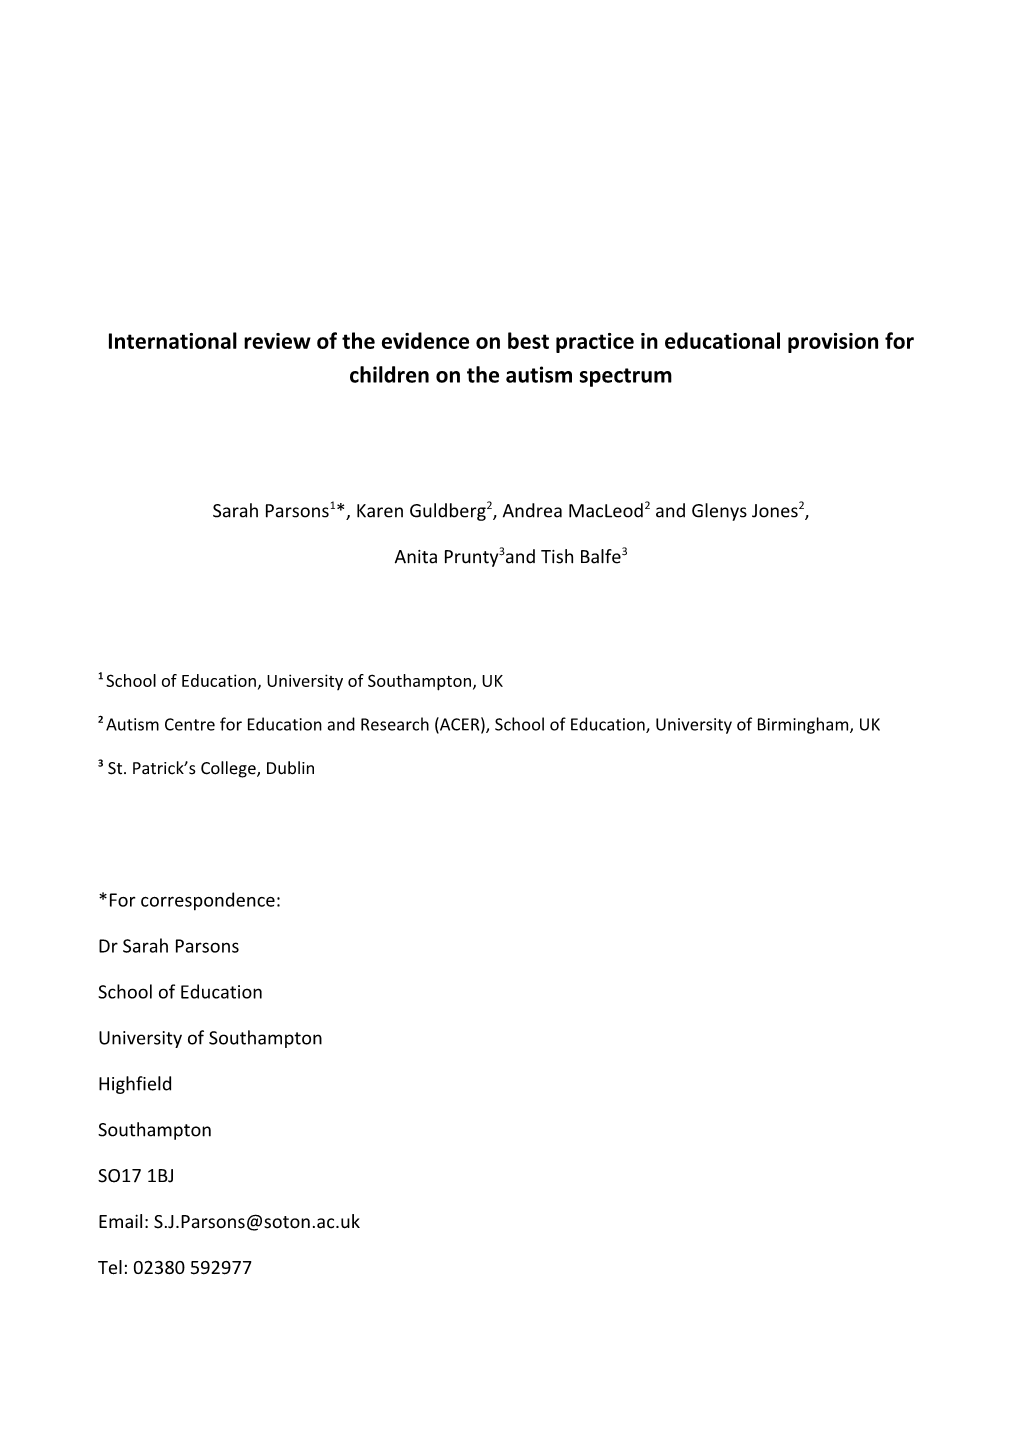 International Review of the Evidence on Best Practice for Best Outcomes in Educational